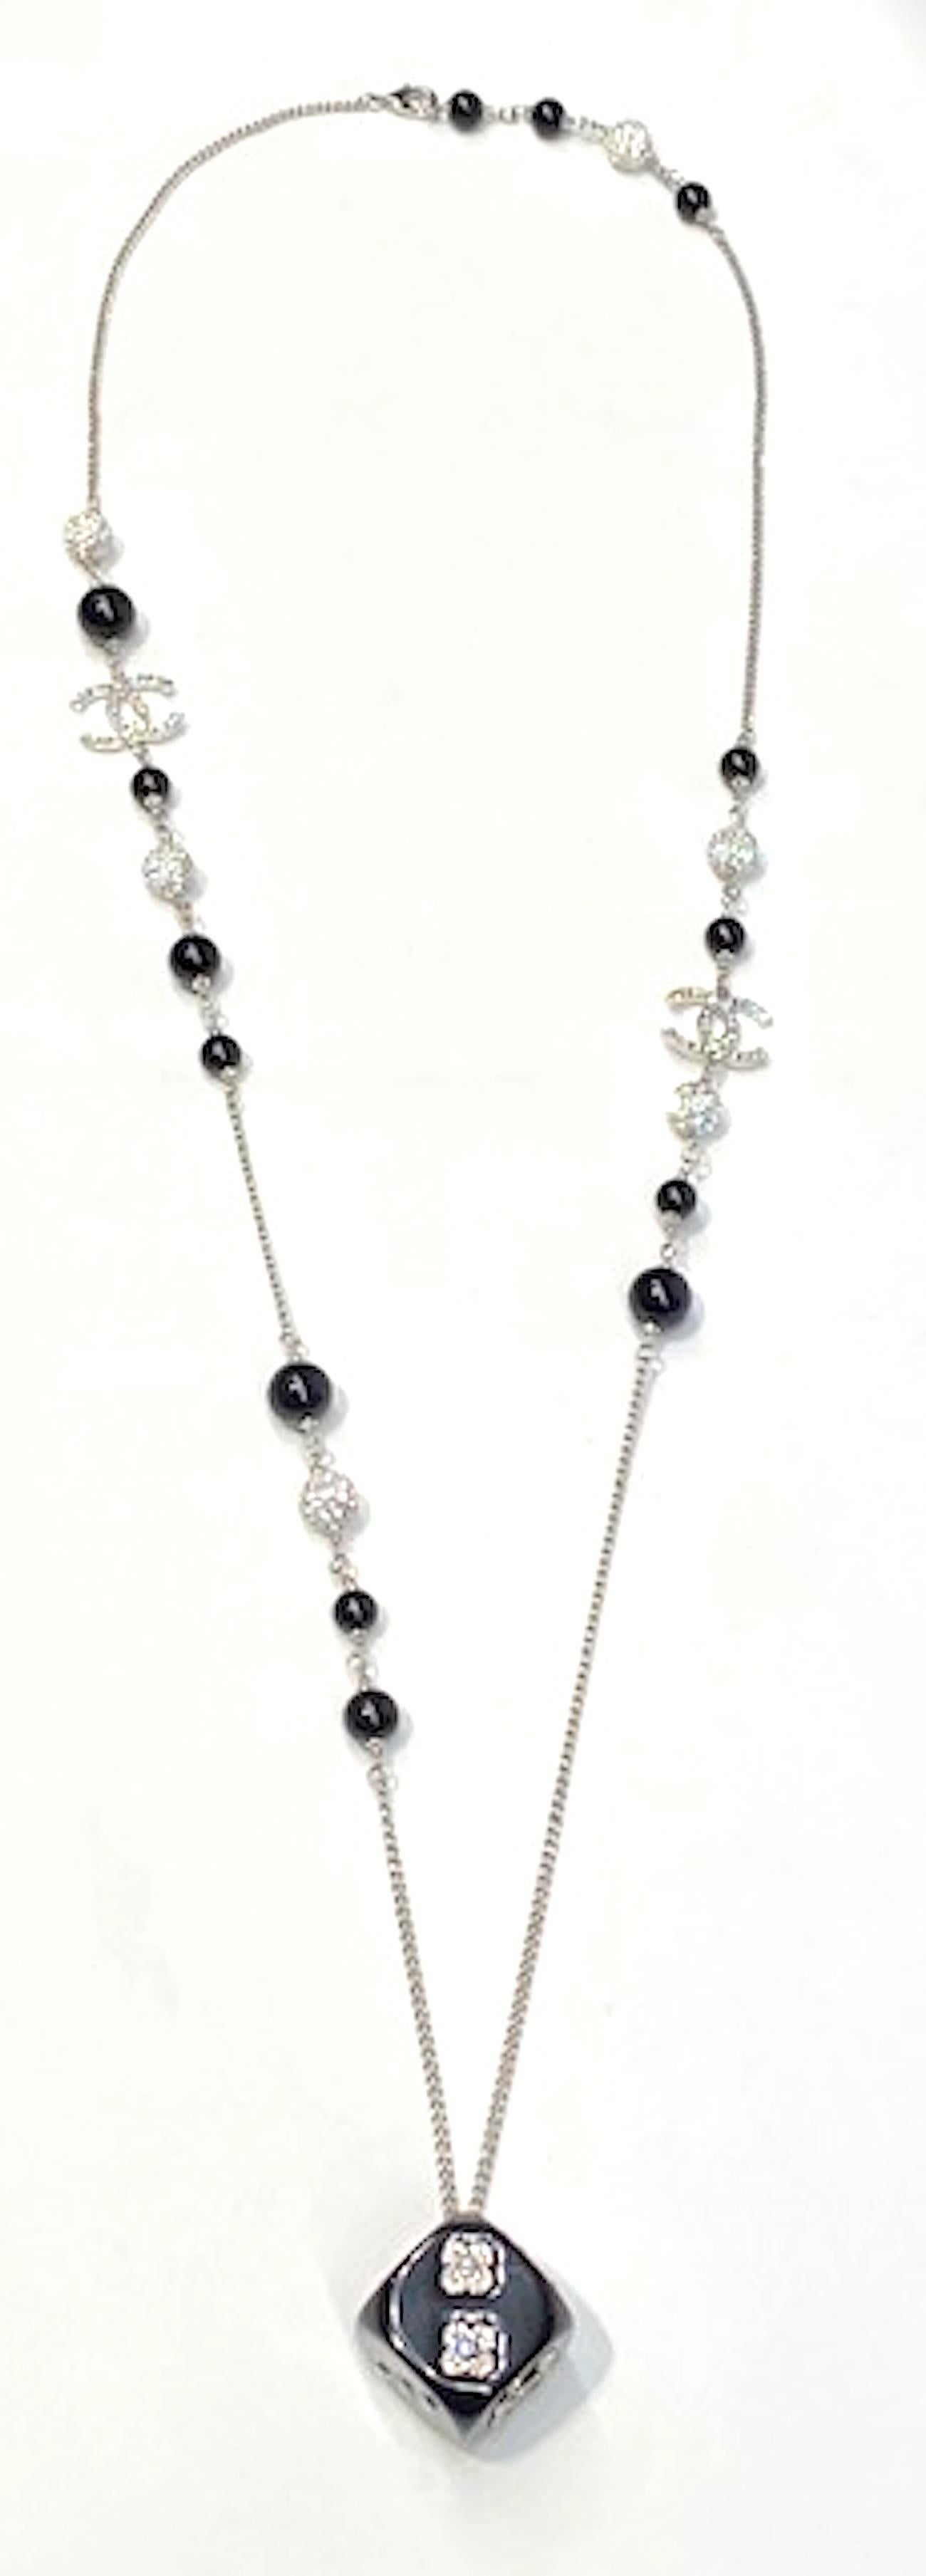 A Chanel unique and fun dice pendant necklace from the 2018 Autumn Collection. The rhodium curb link chain is strung intermittently with 8 and 10 mm black glass beads and 9 mm rhinestone set beach. Additionally, there are two rhinestone set Chanel